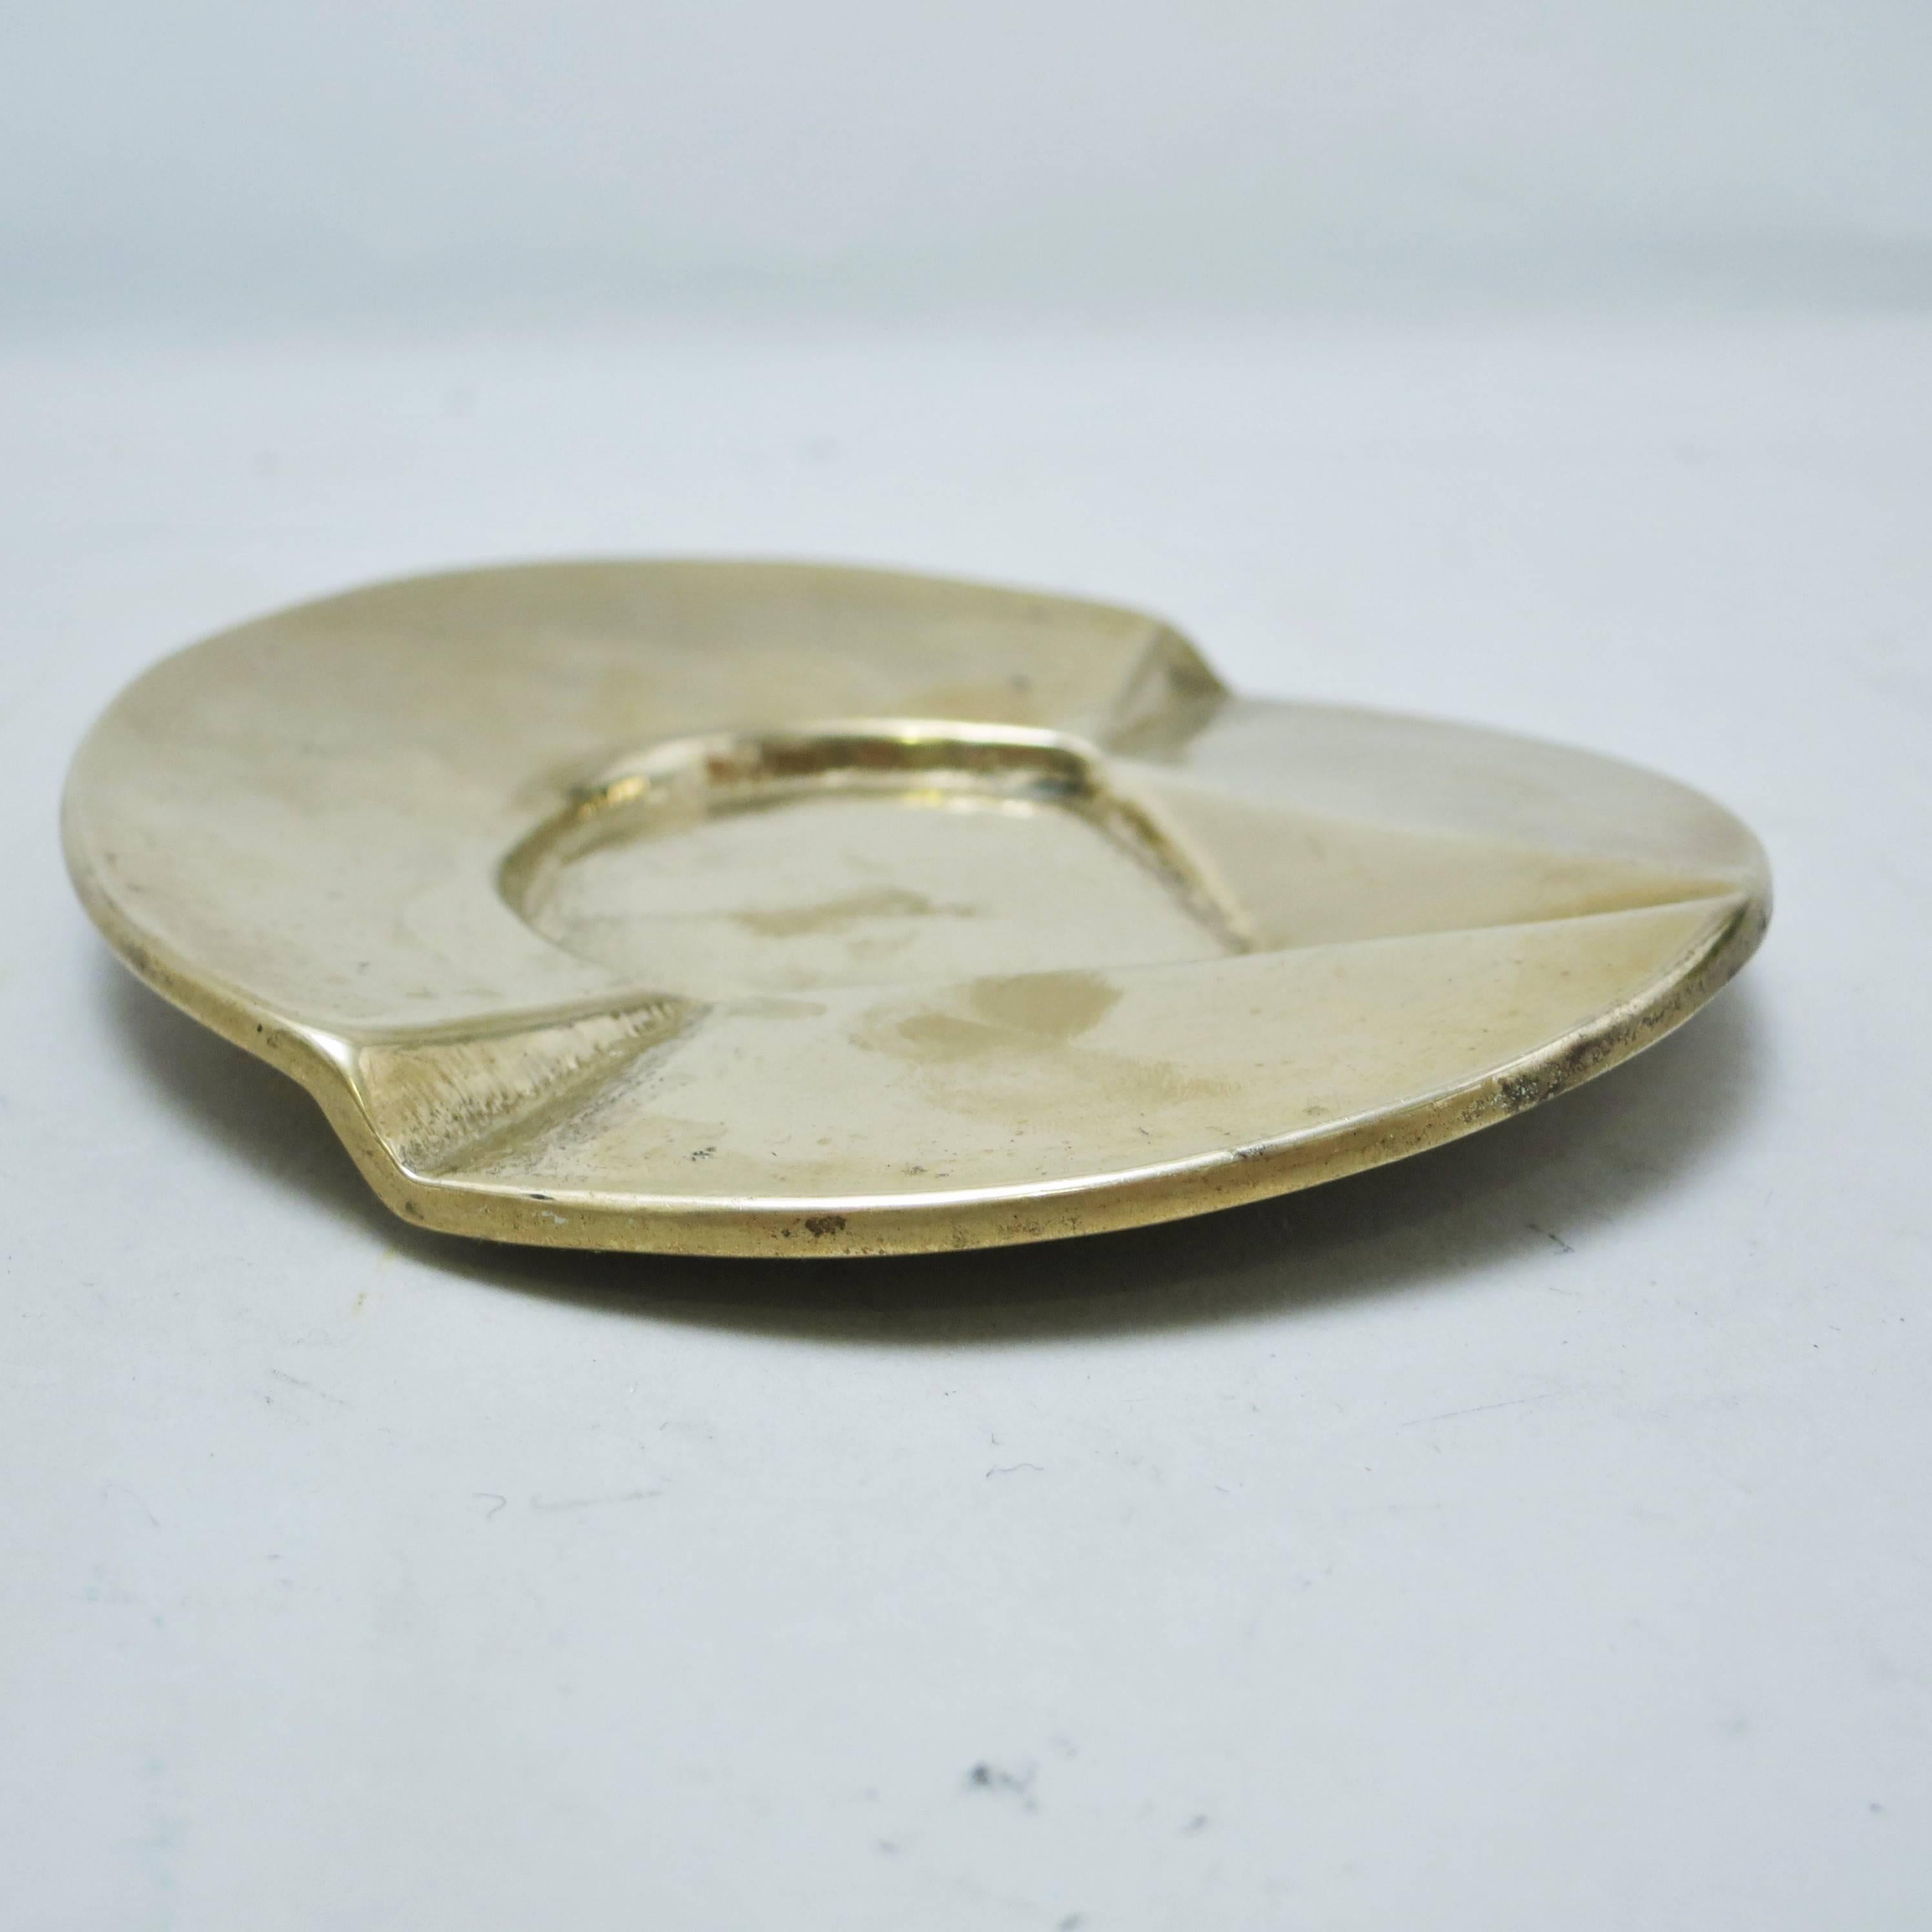 Austrian modernist ashtray in bronze with abstract decor
in the style of Carl Auböck, circa 1950.